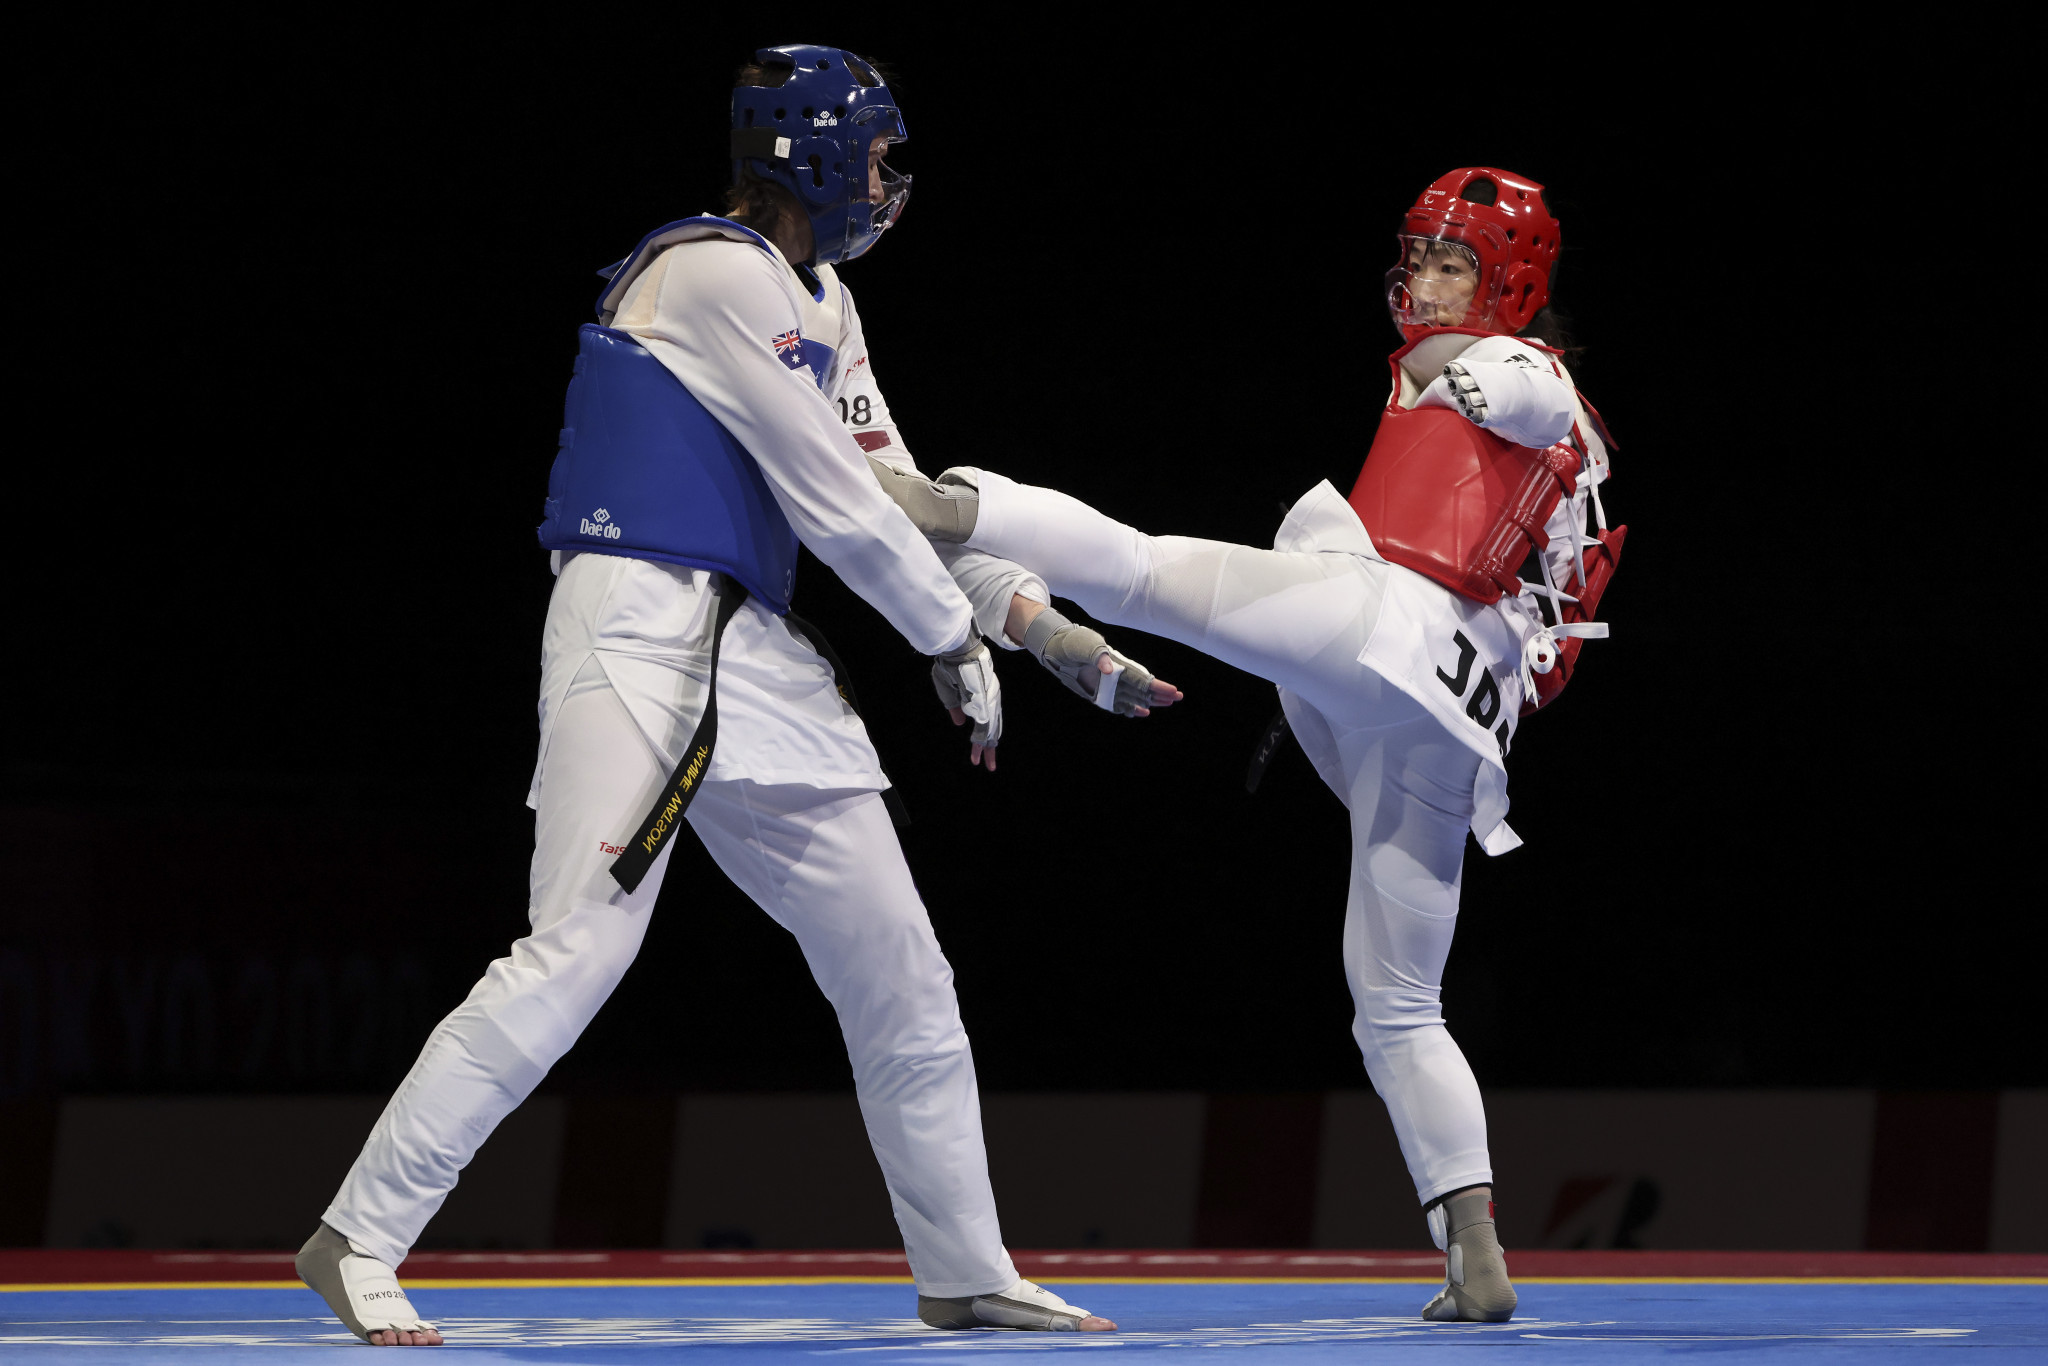 Taekwondo will be making its debut at the Asian Para Games having appeared for the first time in the Paralympics at Tokyo 2020 ©Getty Images